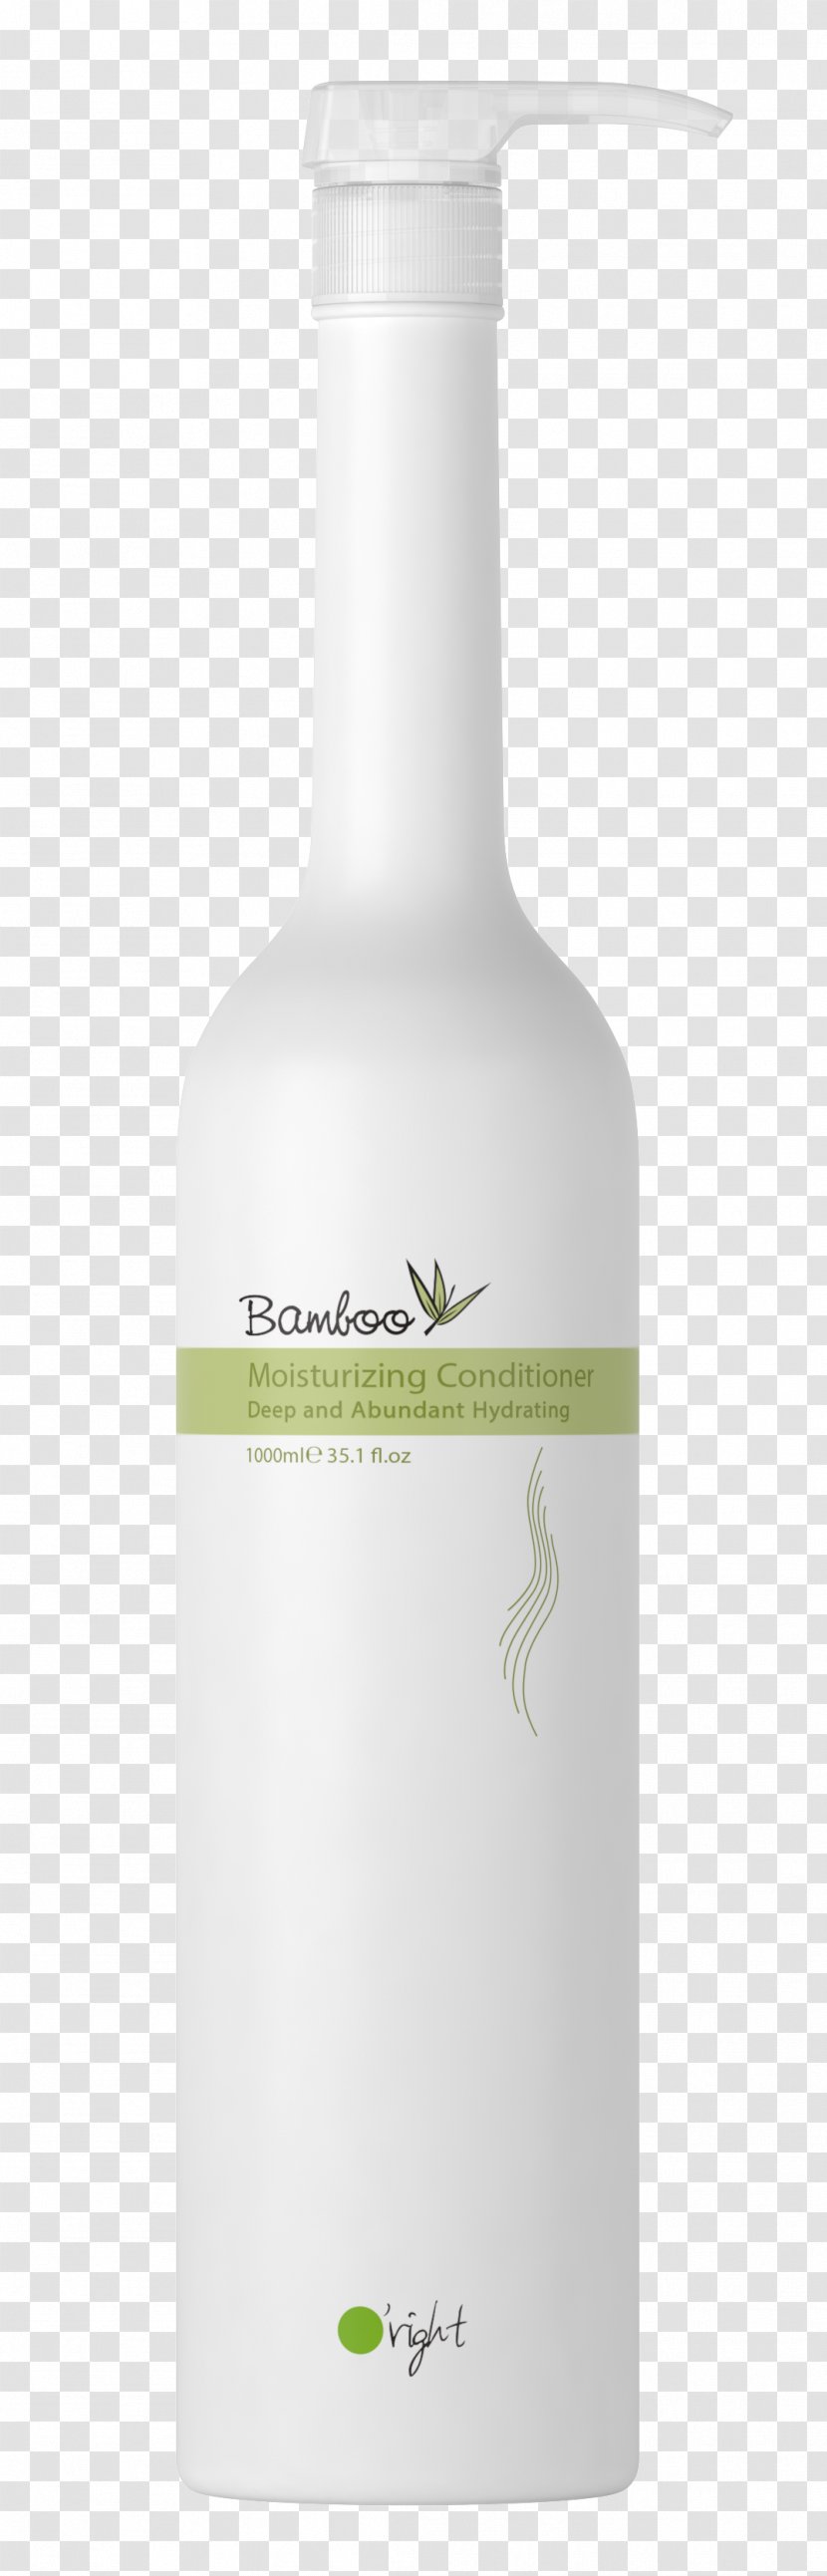 Lotion Cosmetics Hair Conditioner Moisturizer Transparent PNG